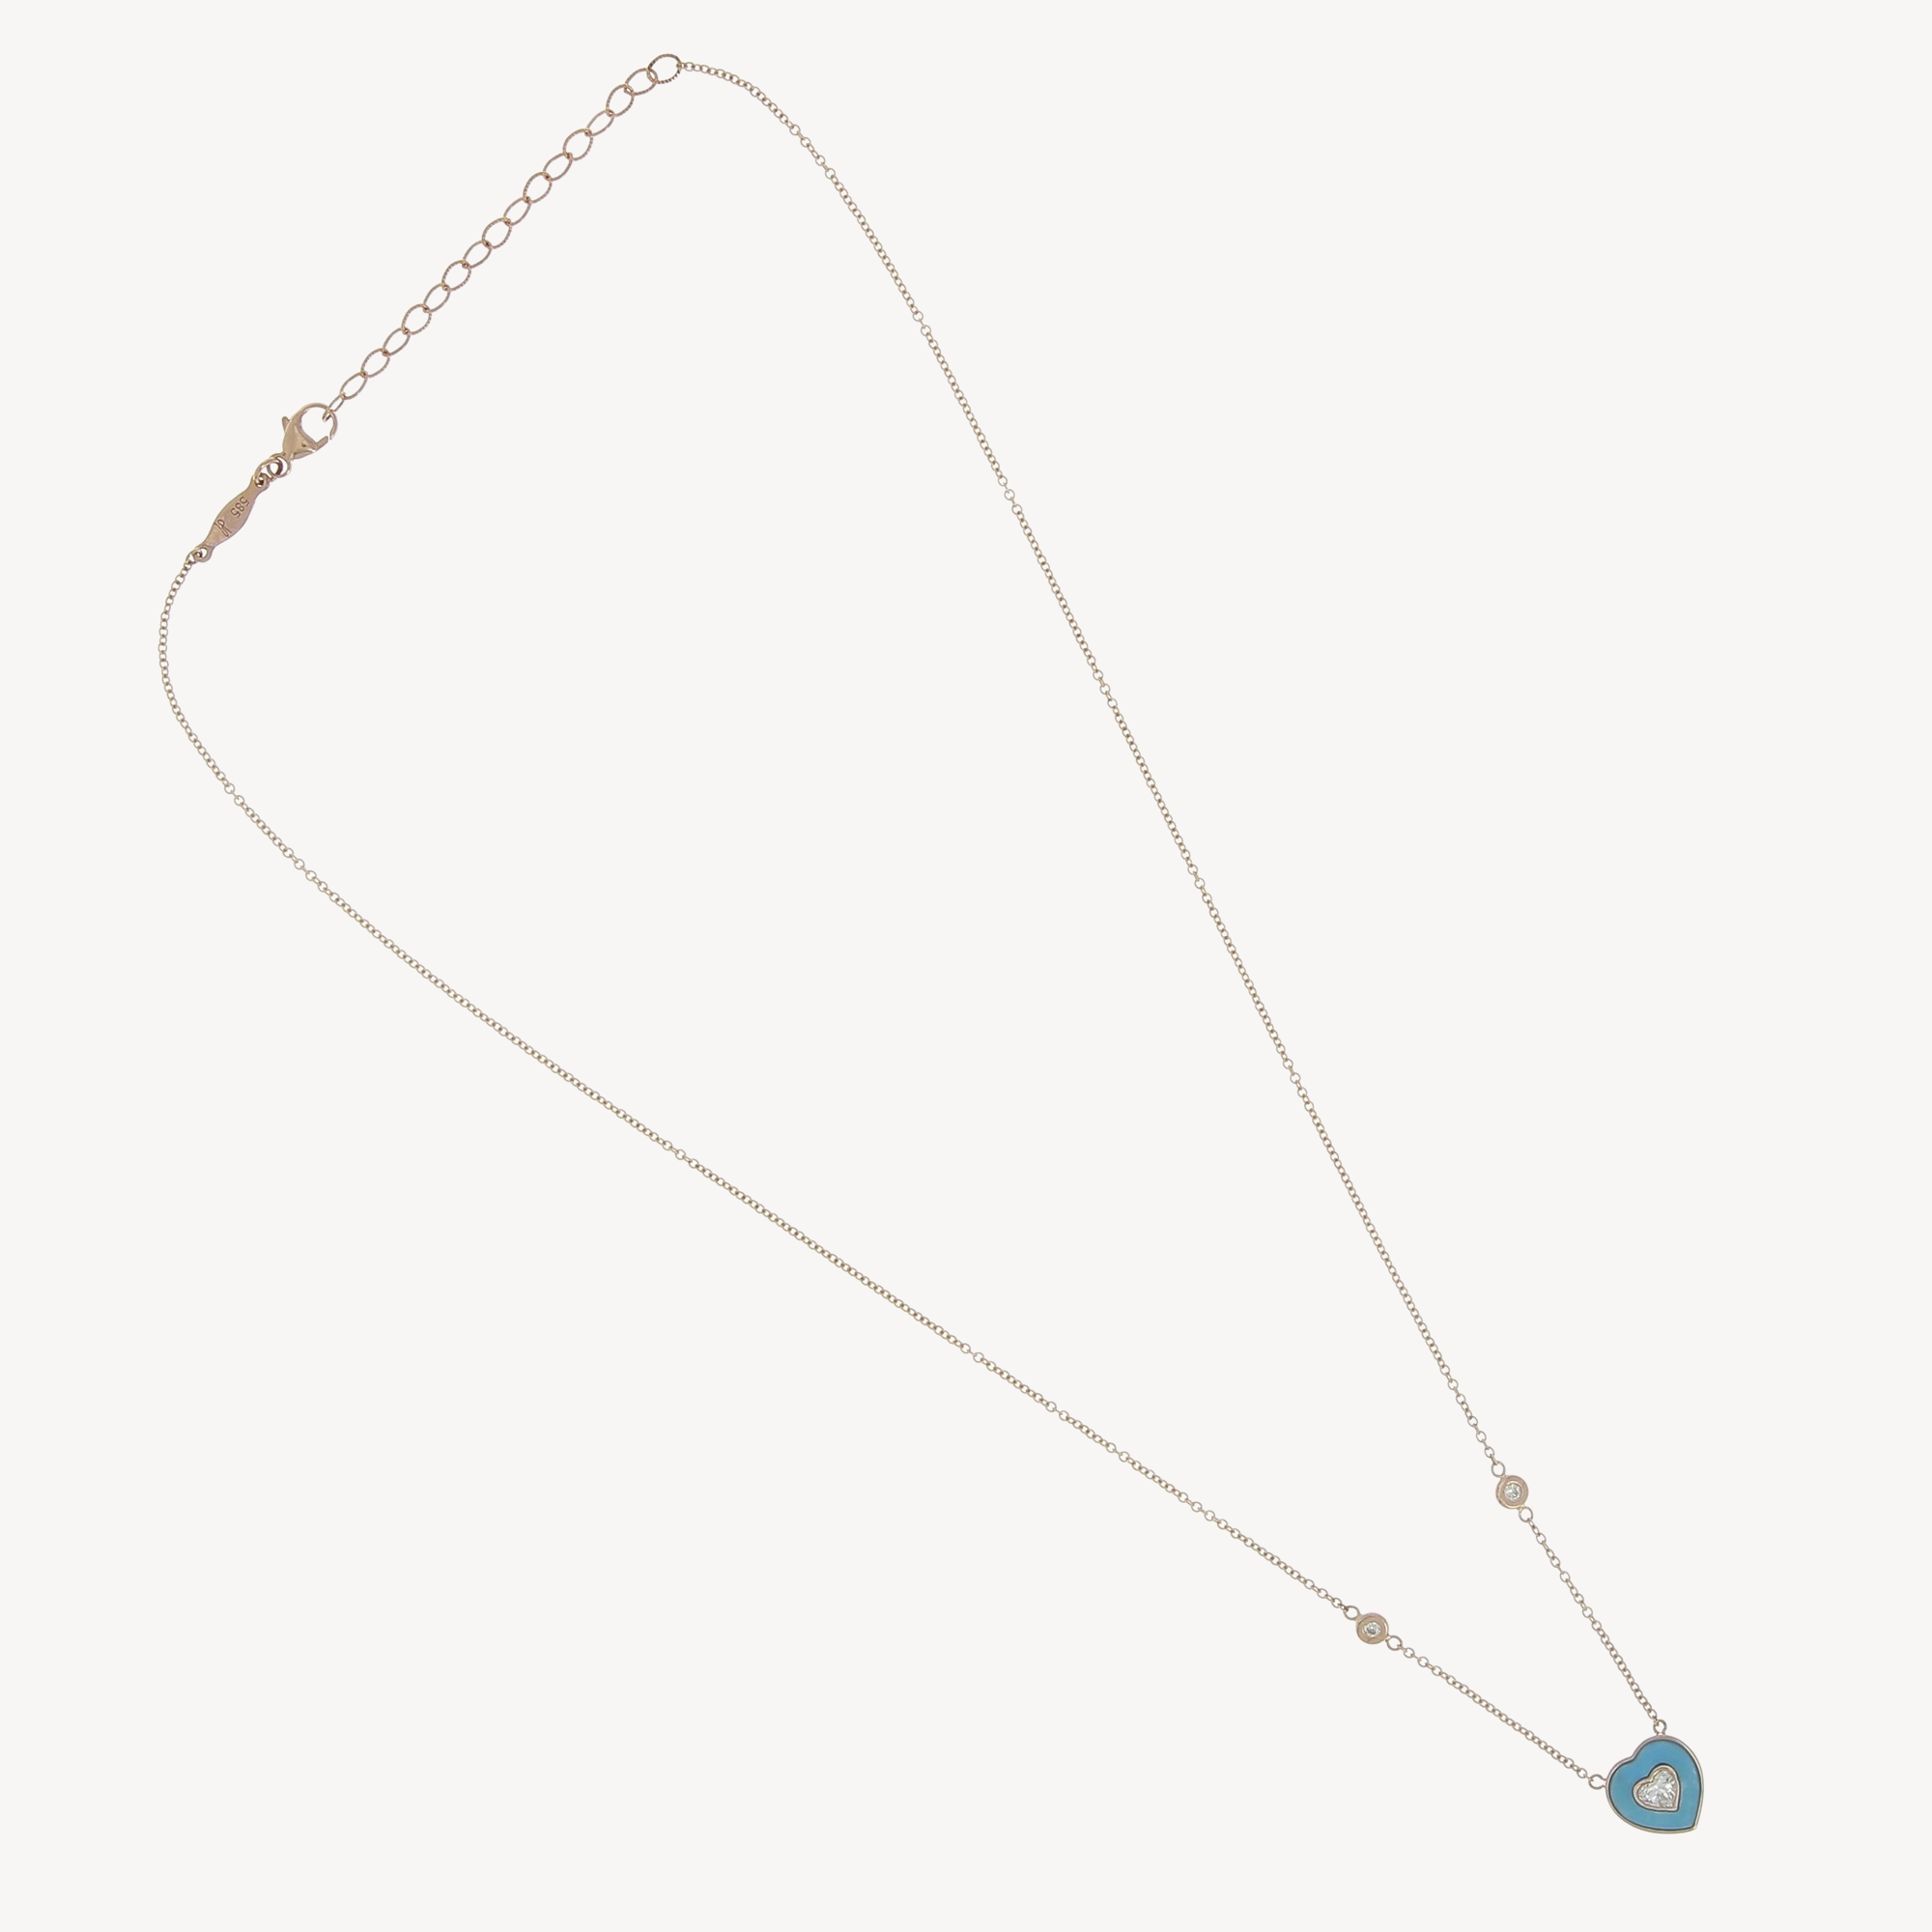 Small turquoise heart necklace with diamond